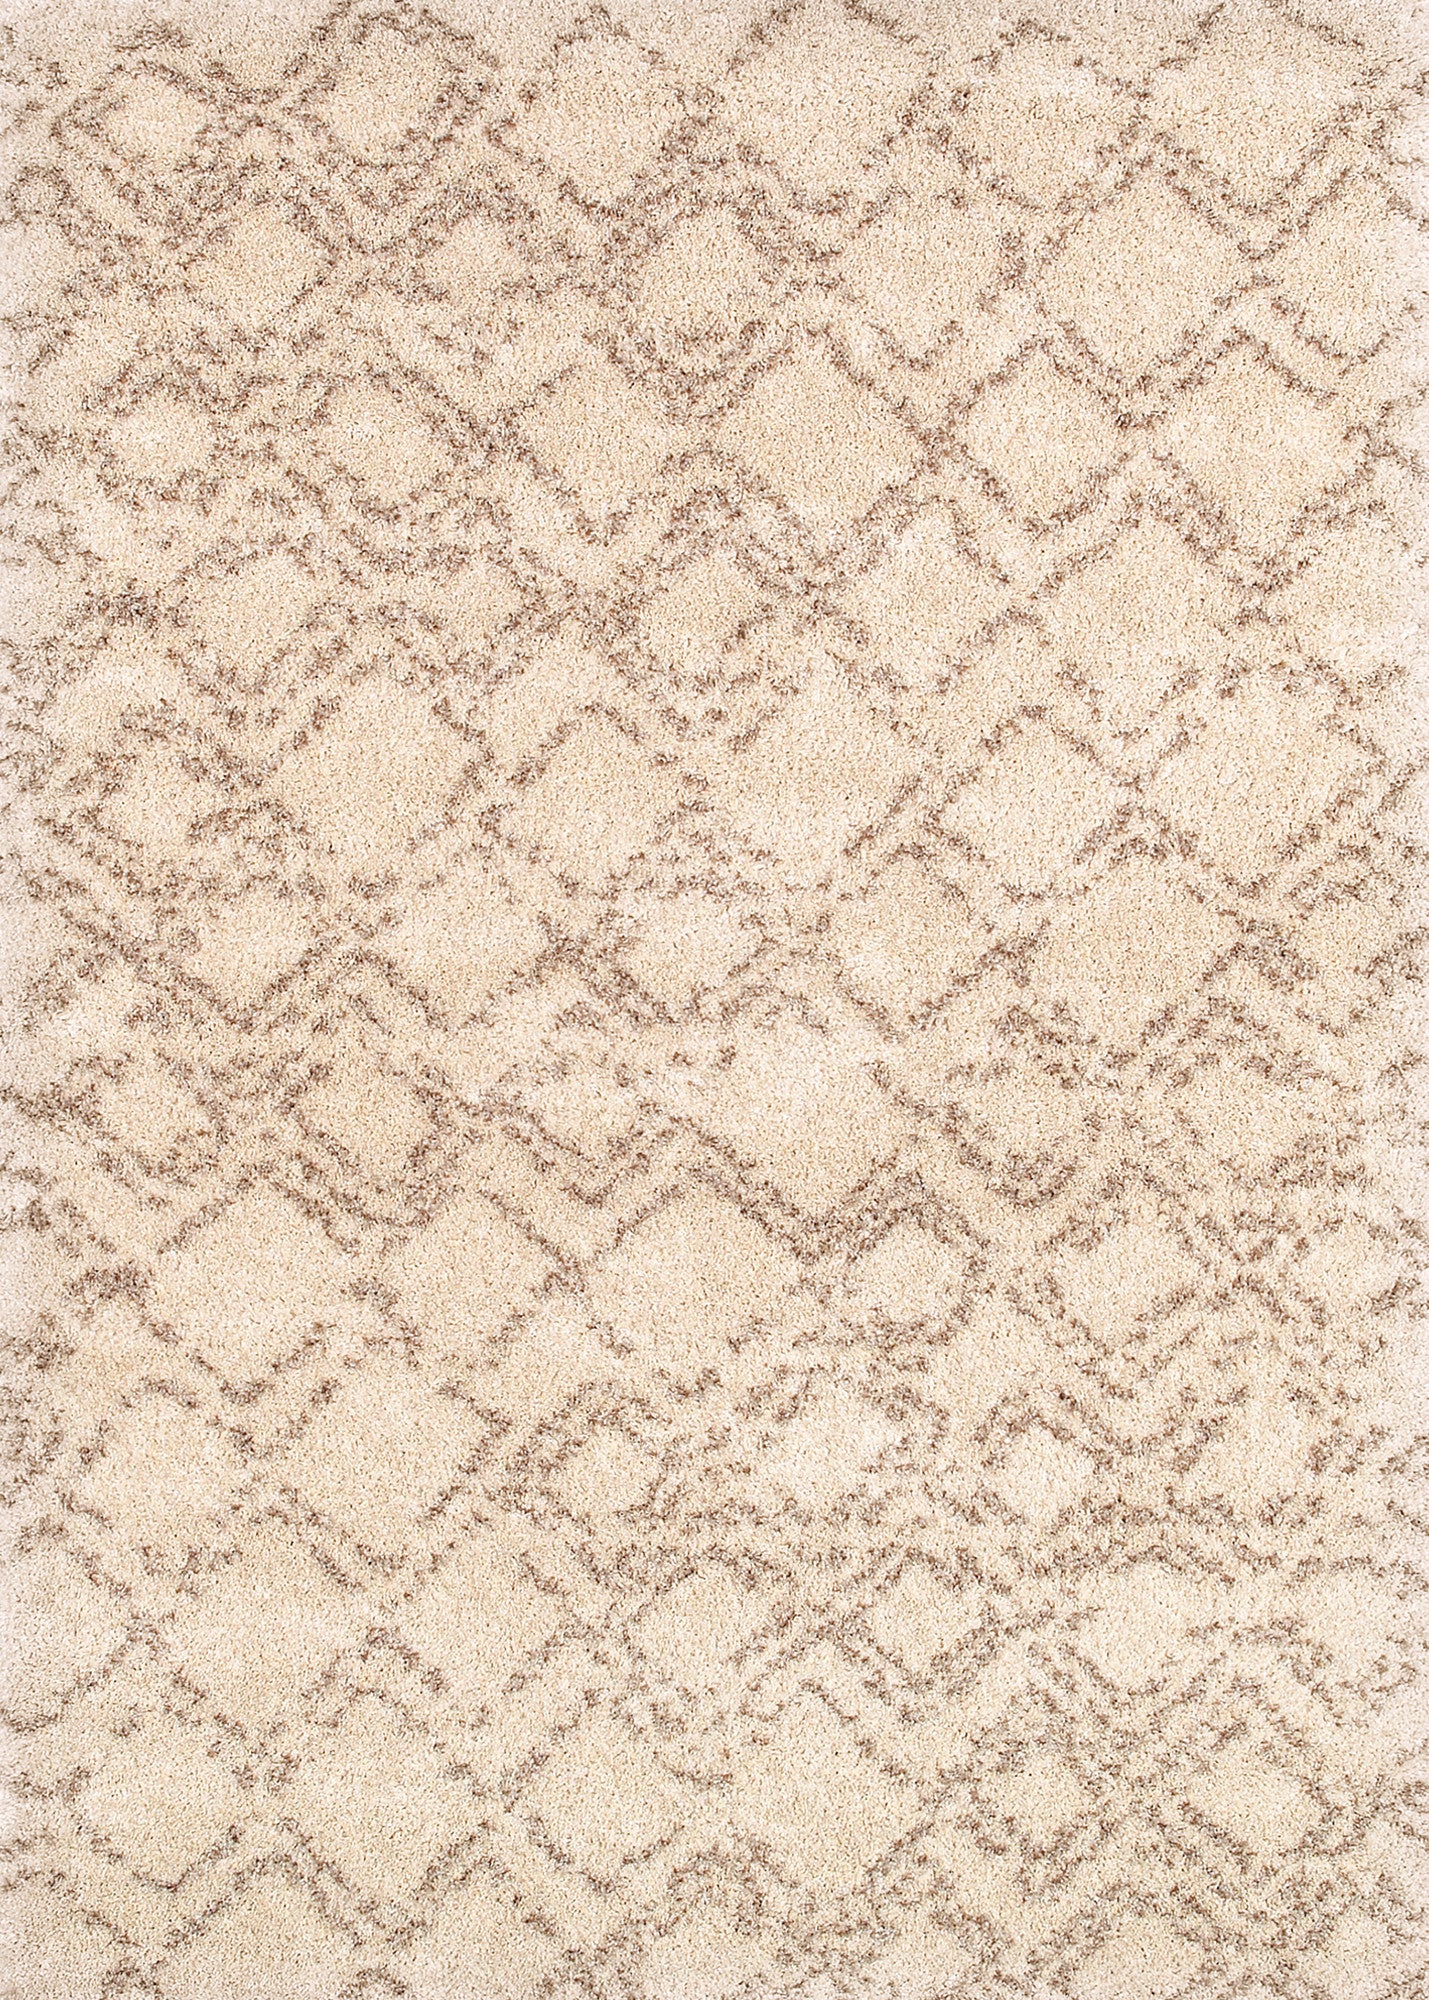 Couristan Bromley Pinnacle Ivory/Camel Area Rug